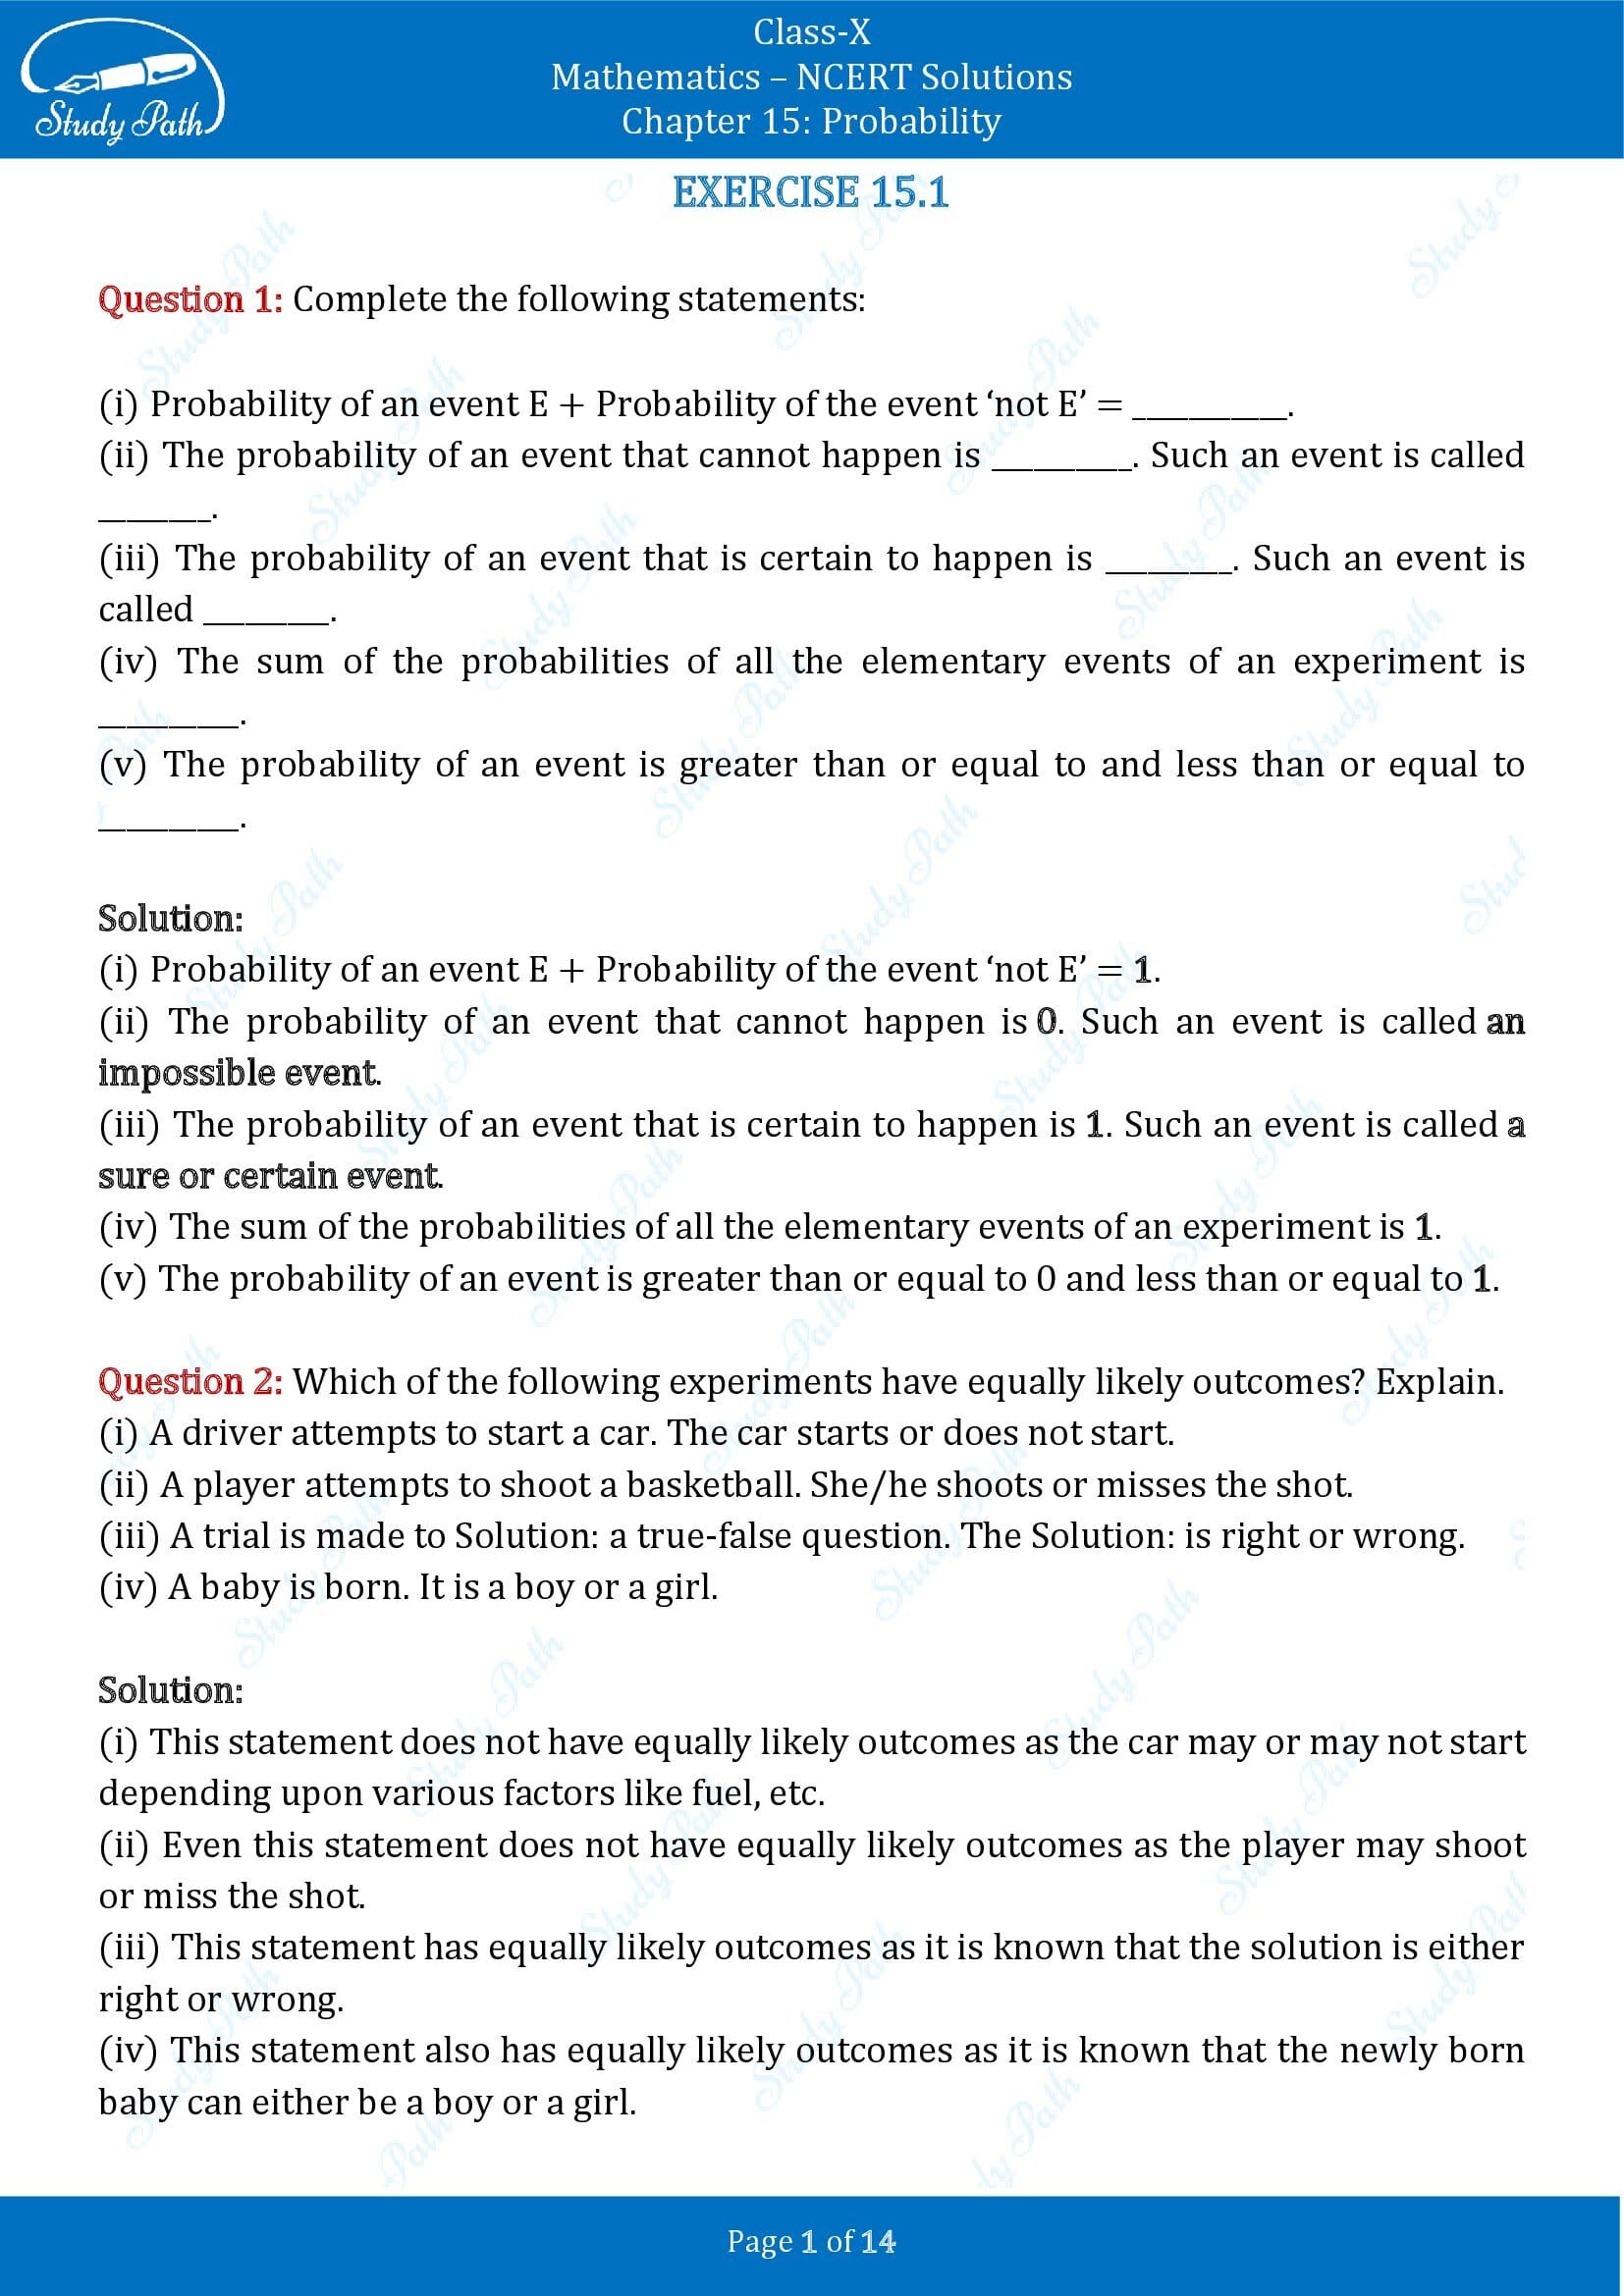 NCERT Solutions for Class 10 Maths Chapter 15 Probability Exercise 15.1 00001